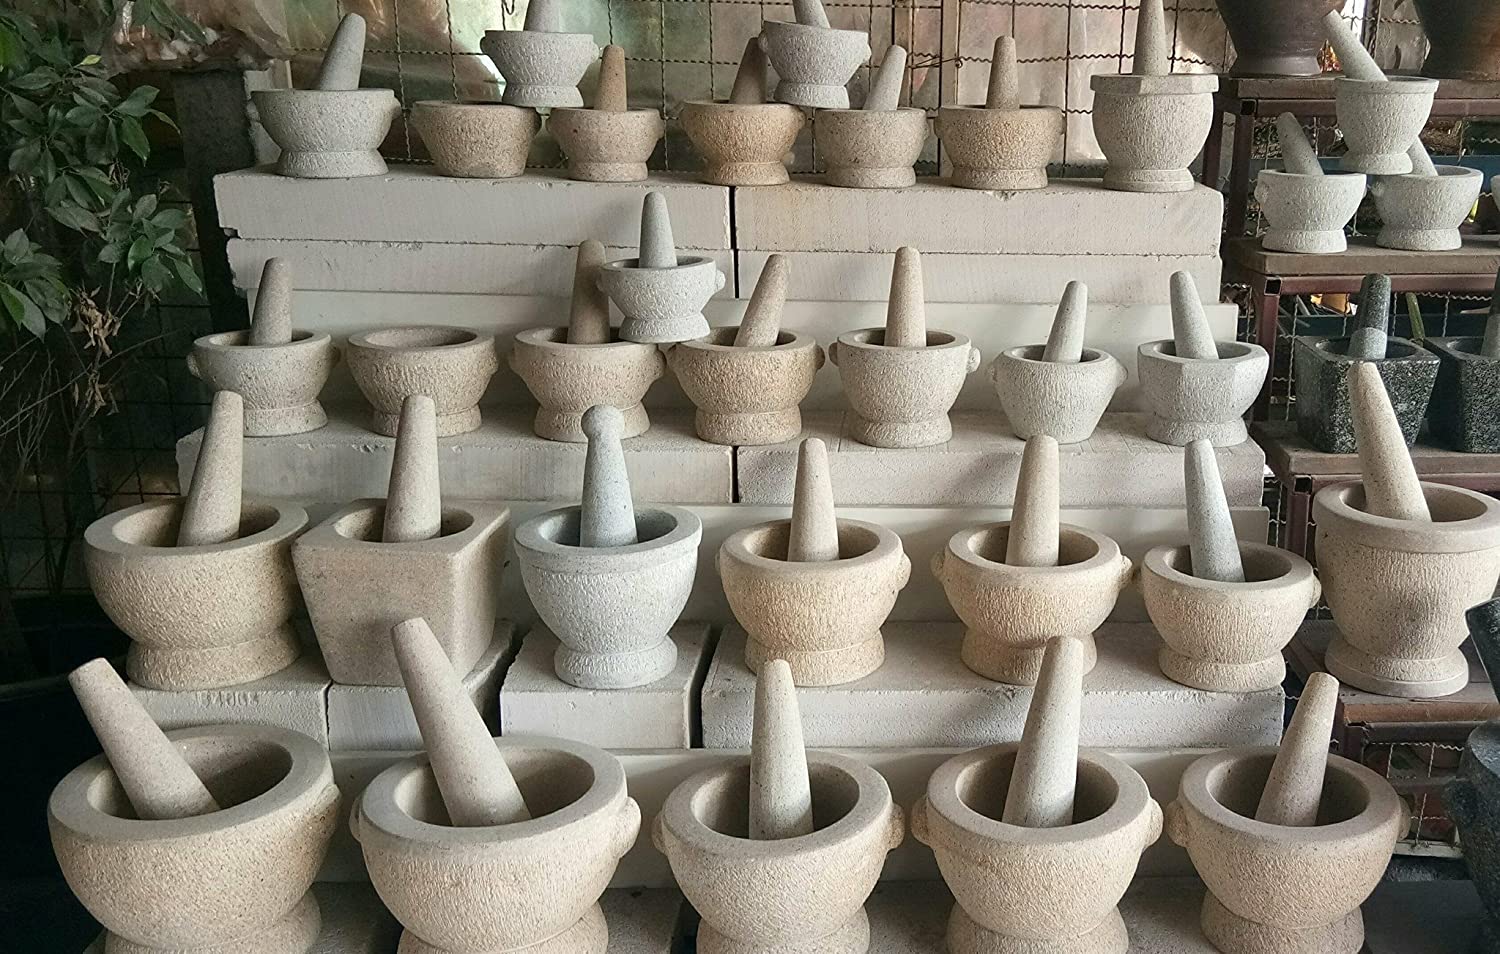 Best Thai Mortar And Pestle Above $200